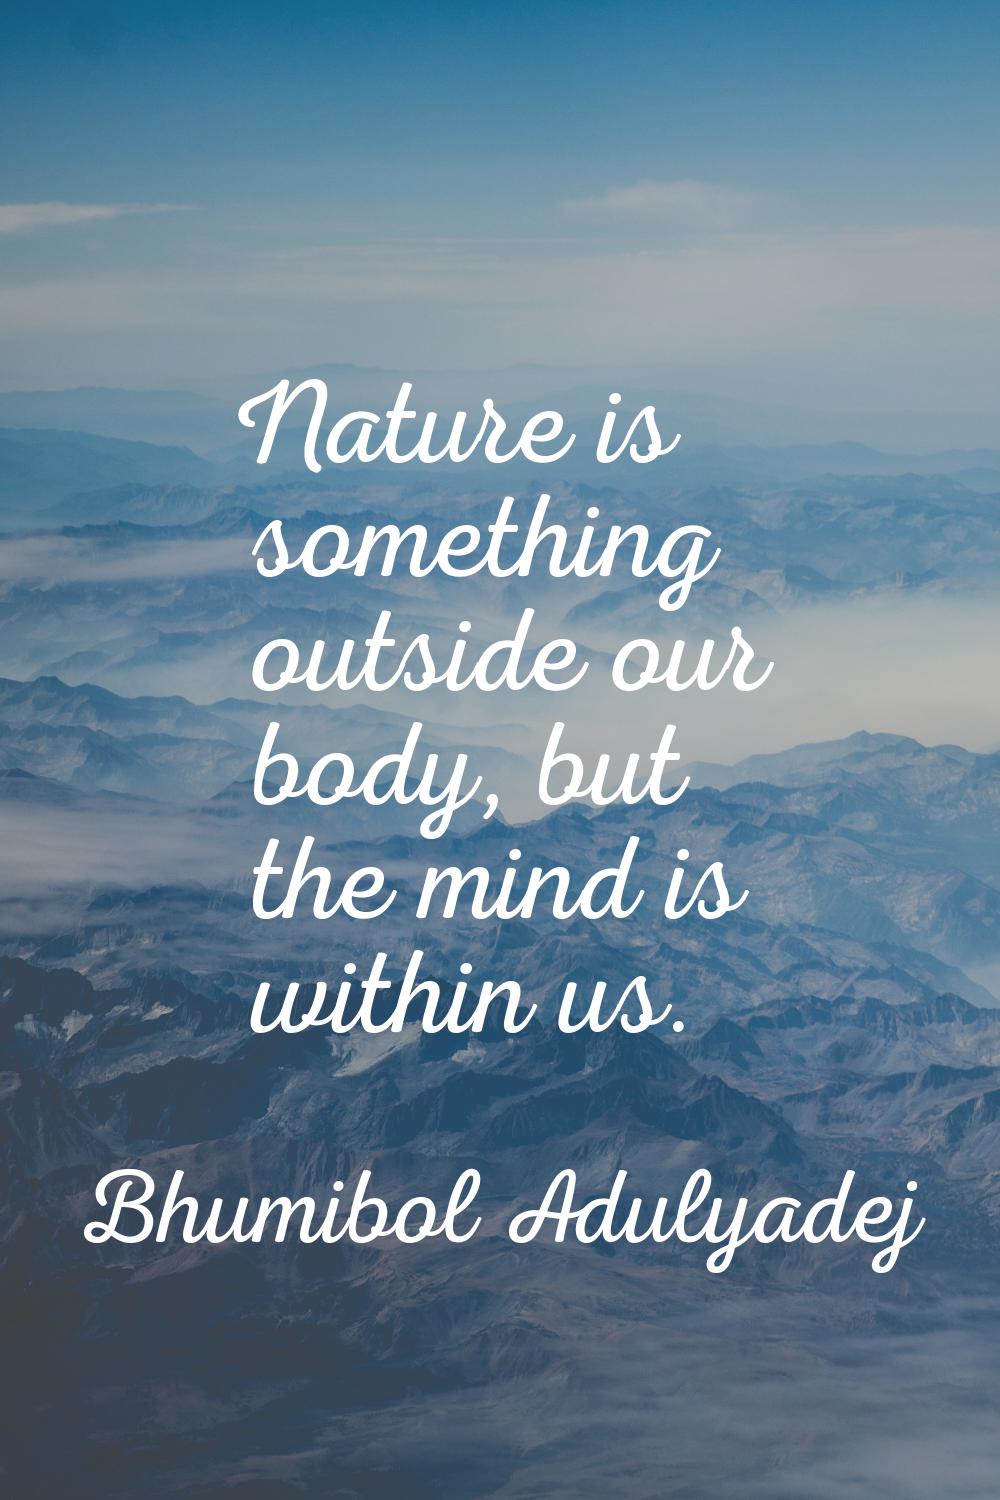 Nature is something outside our body, but the mind is within us.